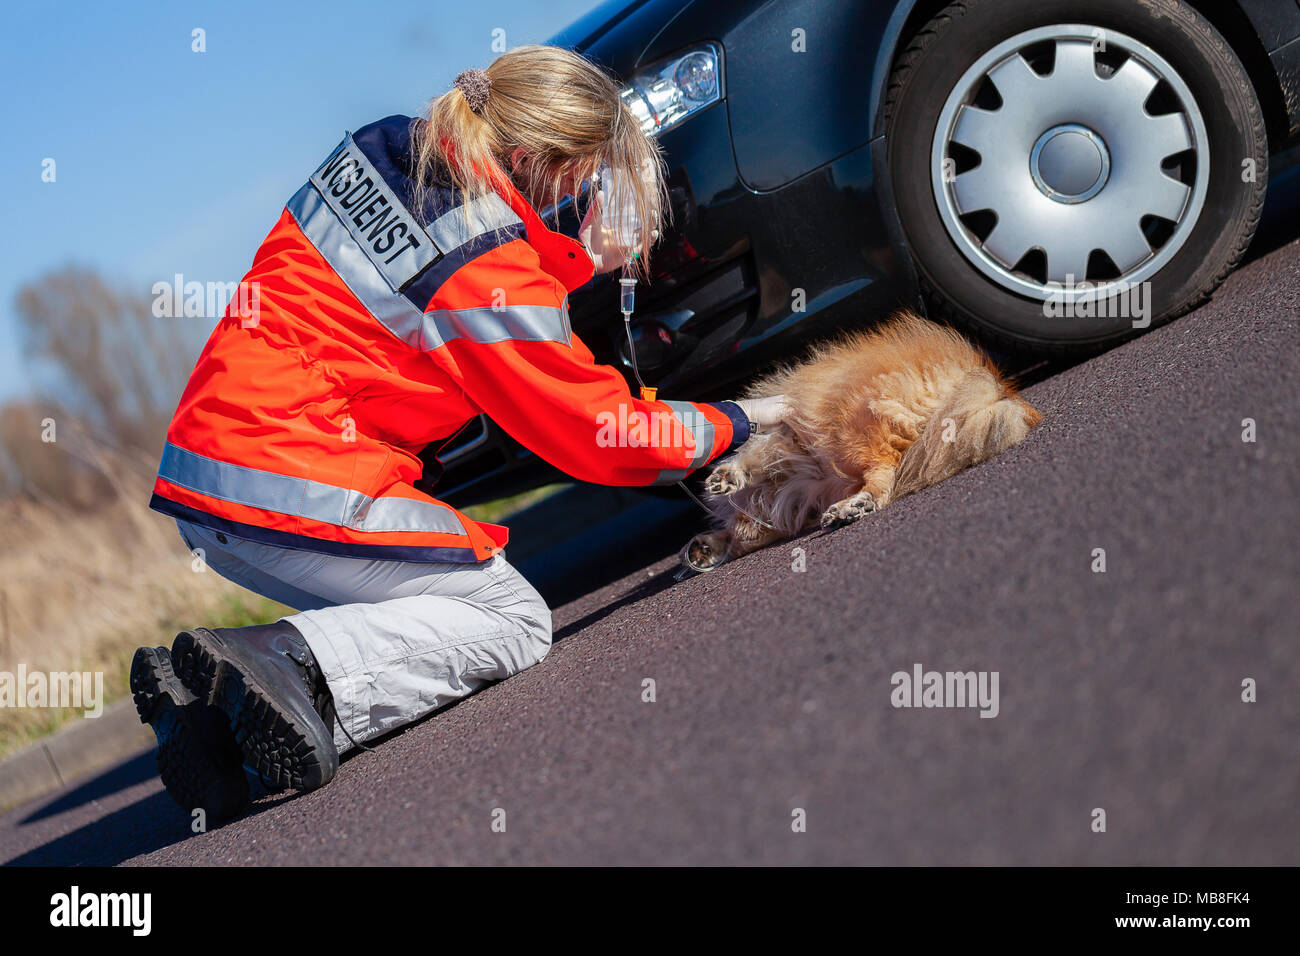 German animal medic treats an injured dog. The german word Rettungsdienst means rescue service. Stock Photo